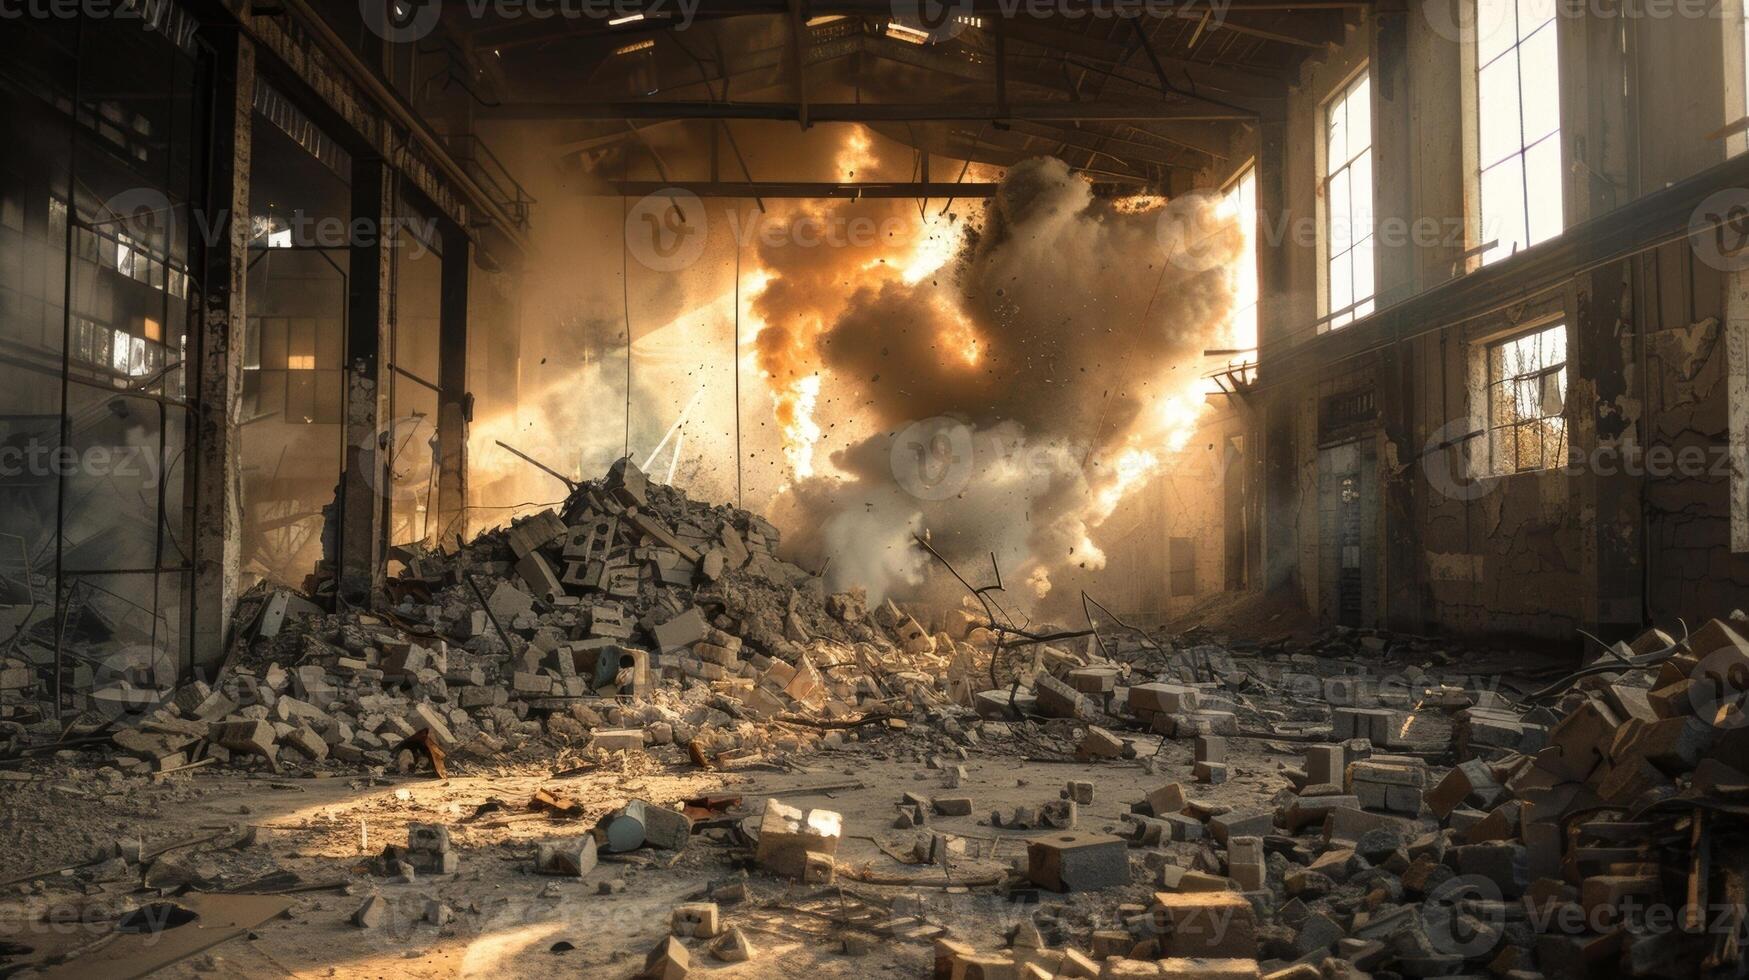 Controlled explosions through the walls of an old factory reducing it to a pile of rubble photo